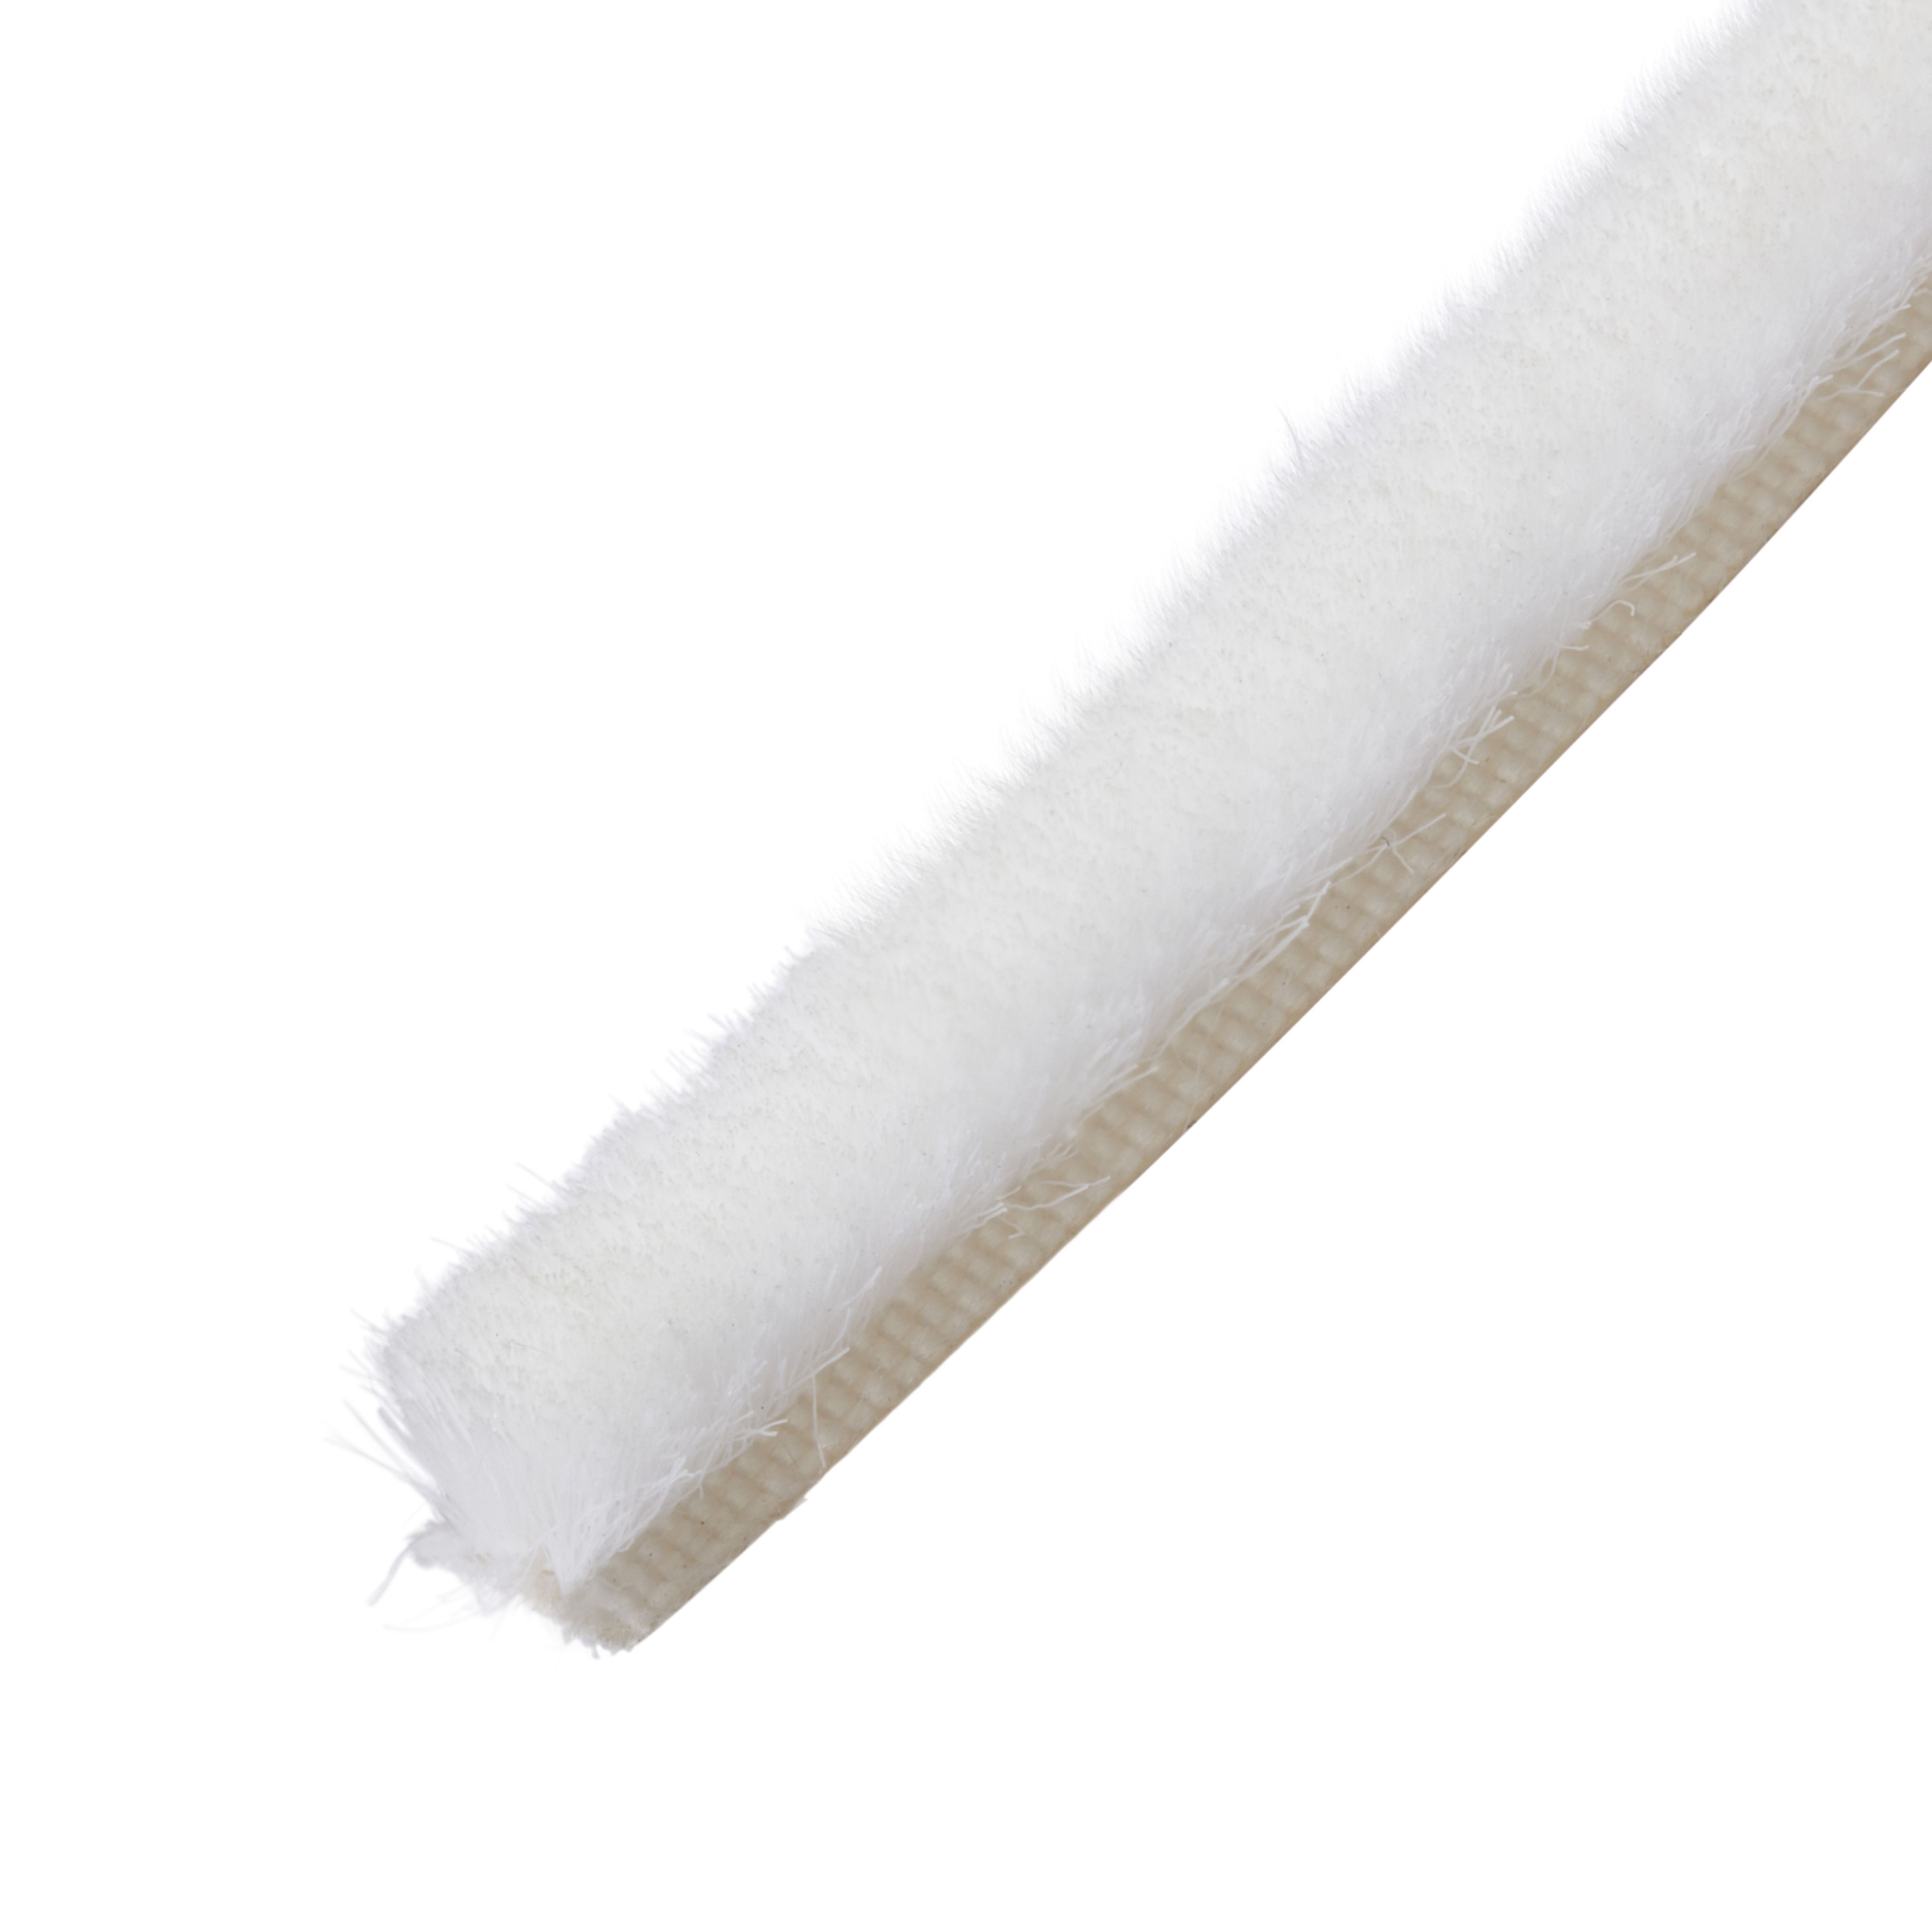 Diall White Plastic Self-adhesive Draught excluder, (L)20m